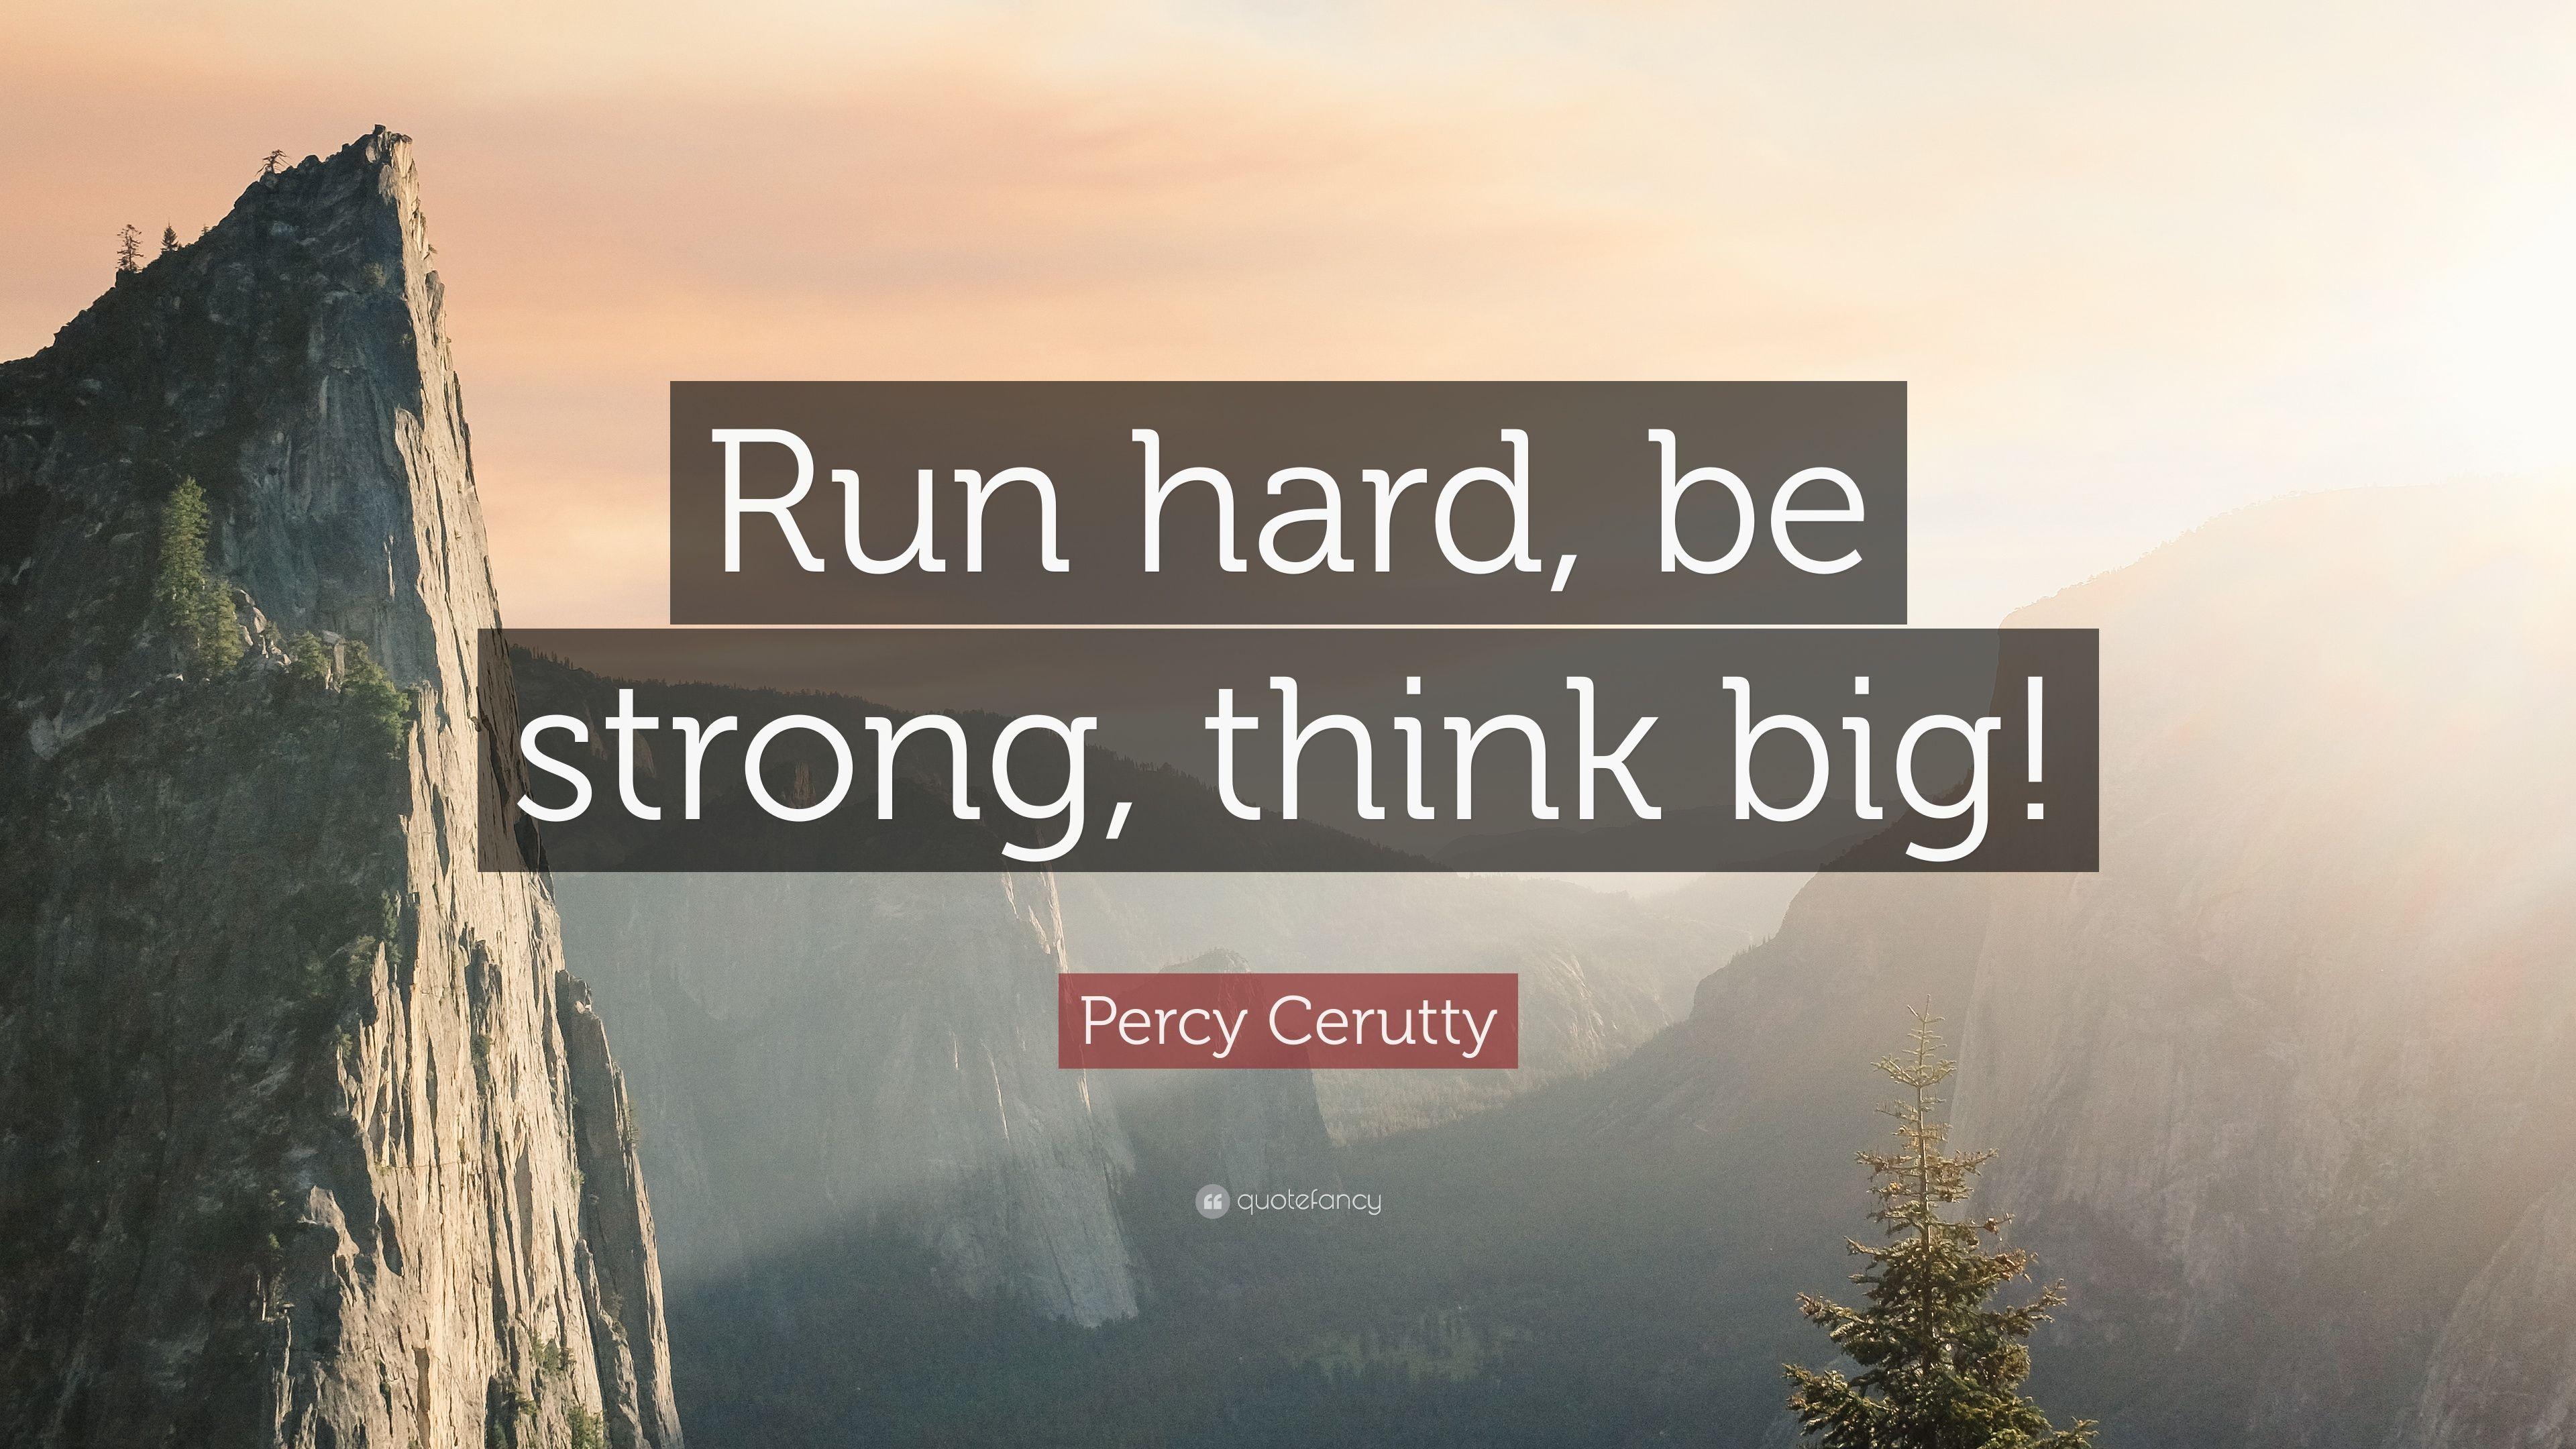 Percy Cerutty Quote: “Run hard, be strong, think big!” 12